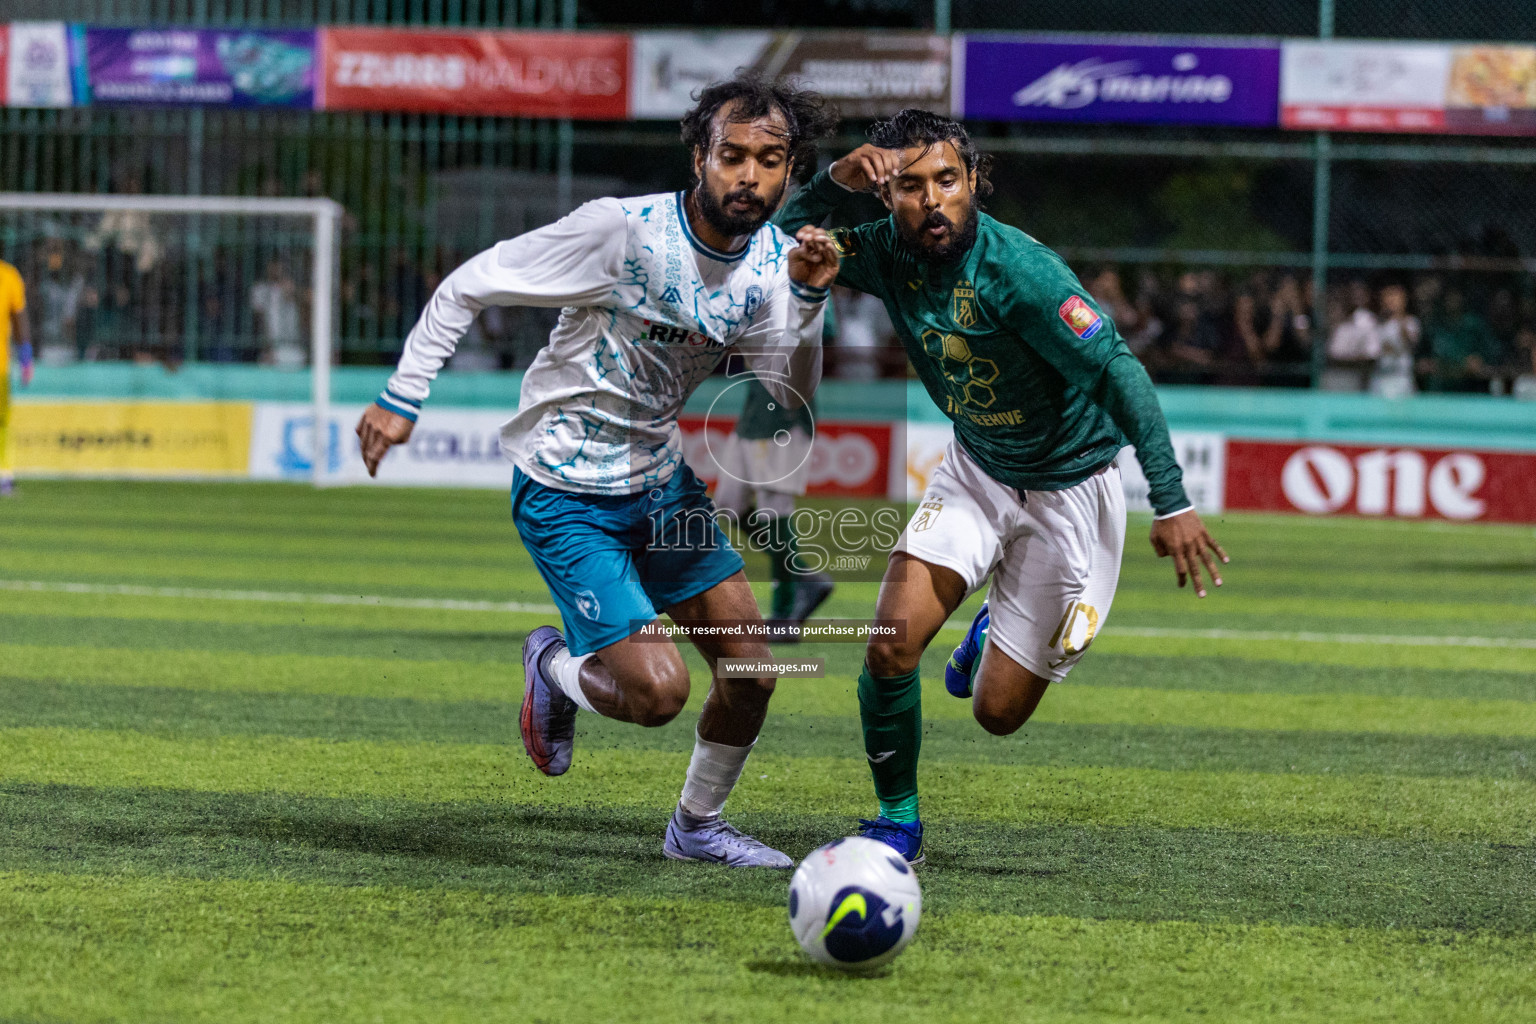 Thimarafushi vs Gaafaru in the finals of Sonee Sports Golden Futsal Challenge 2022 held on 30 March 2022 in Hulhumale, Male', Maldives. Photos by Hassan Simah